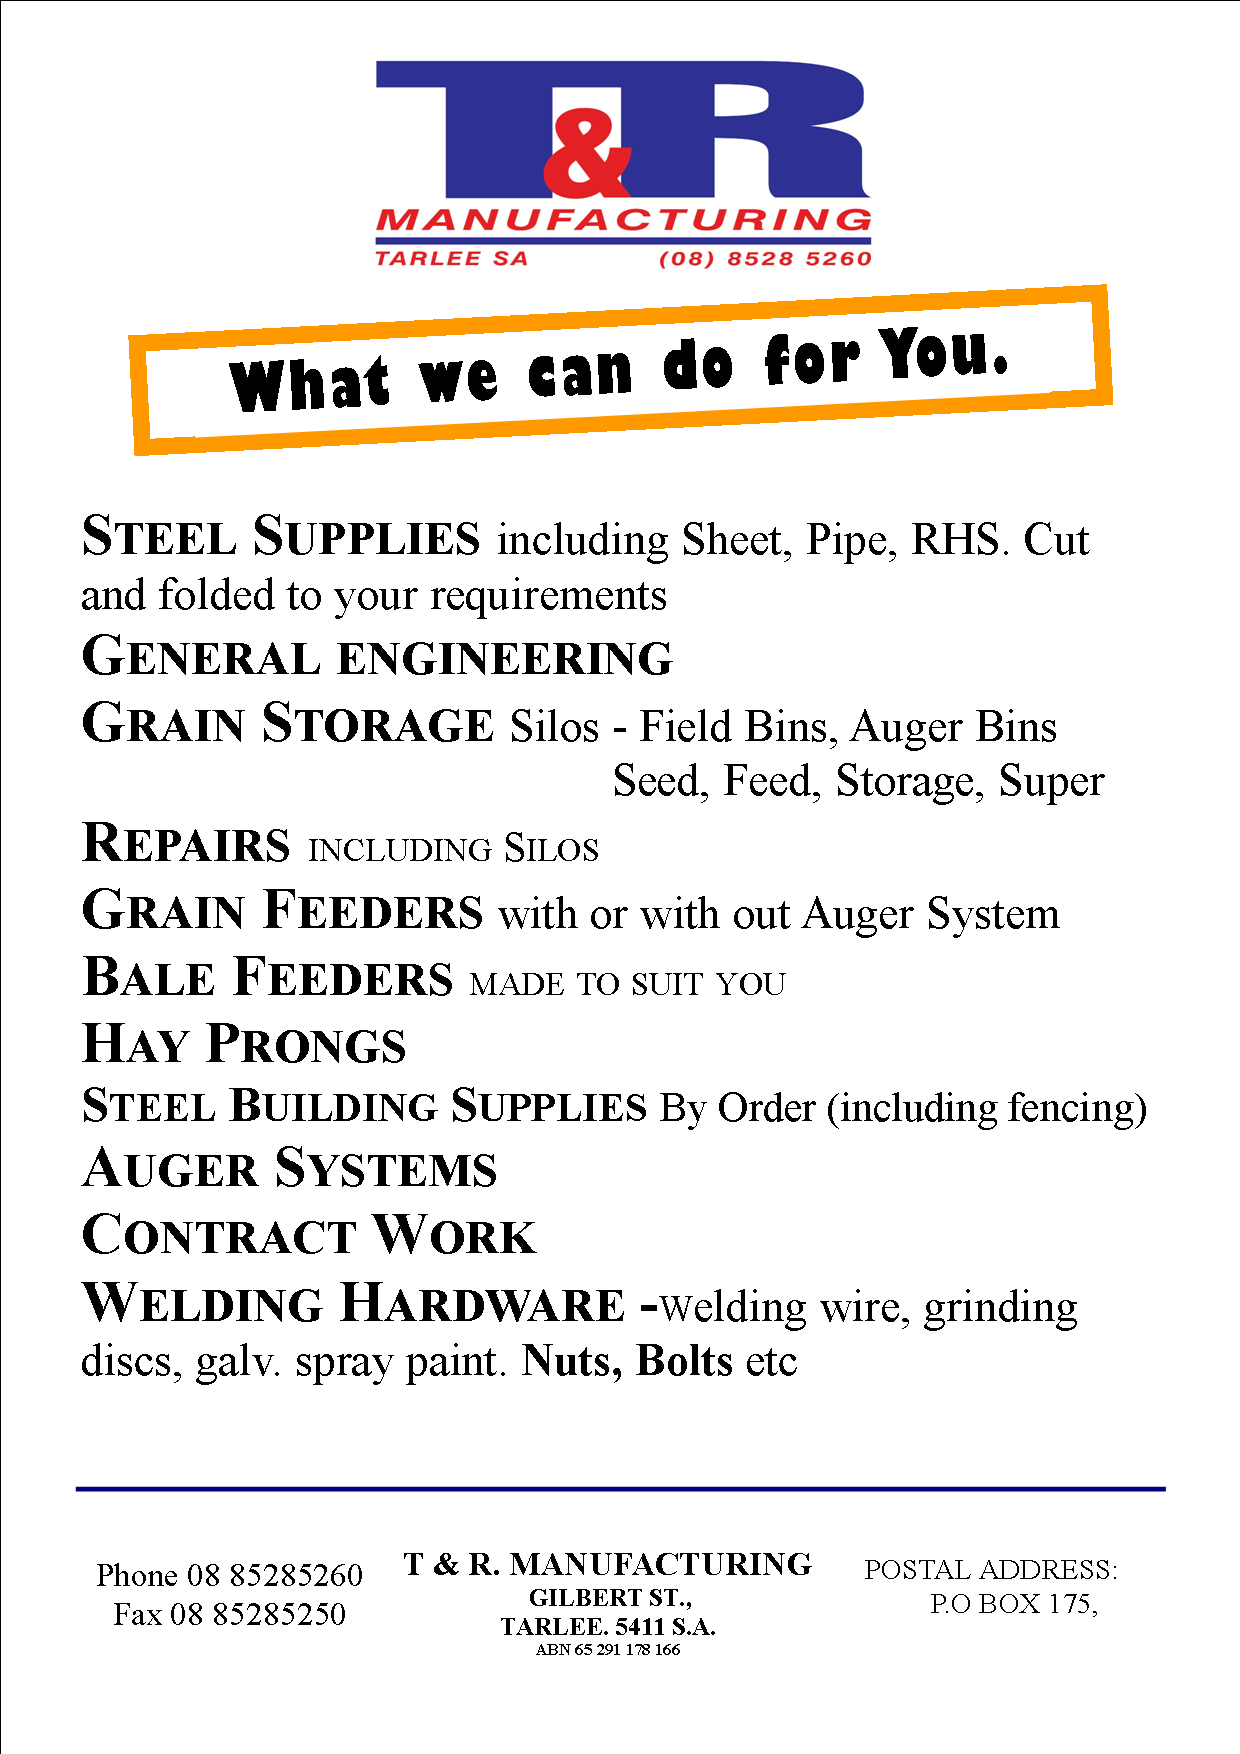 What we can do for you.